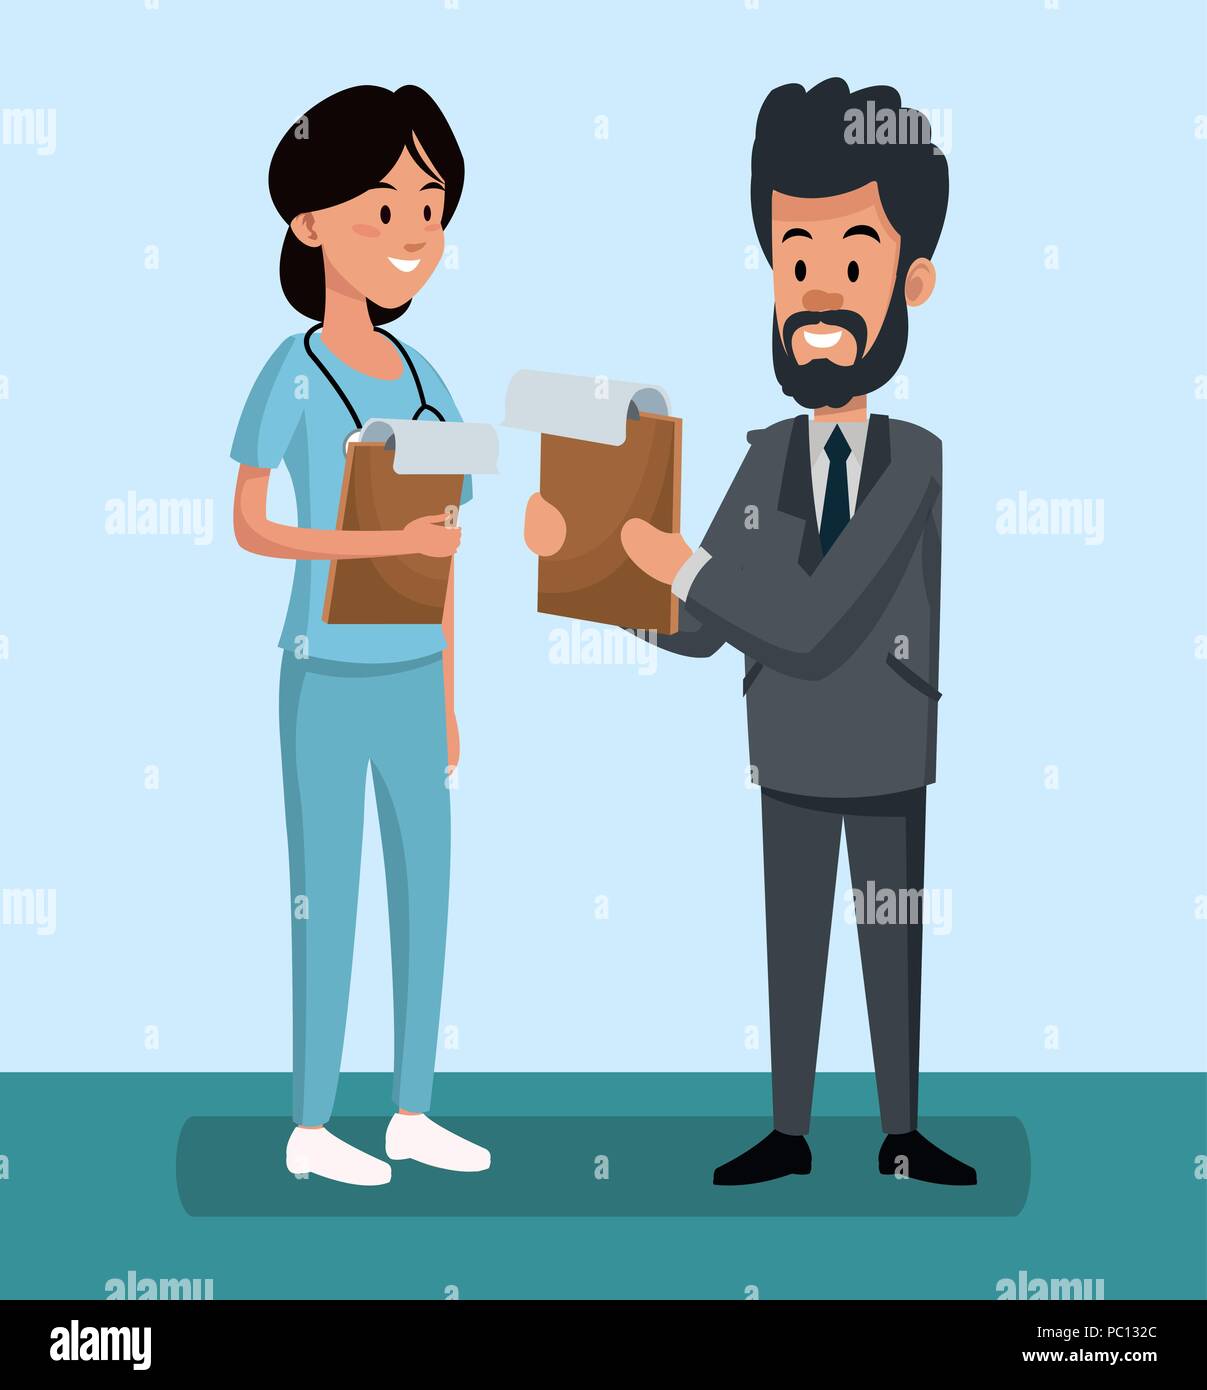 Businessman and woman doctor cartoons vector illustration graphic design Stock Vector